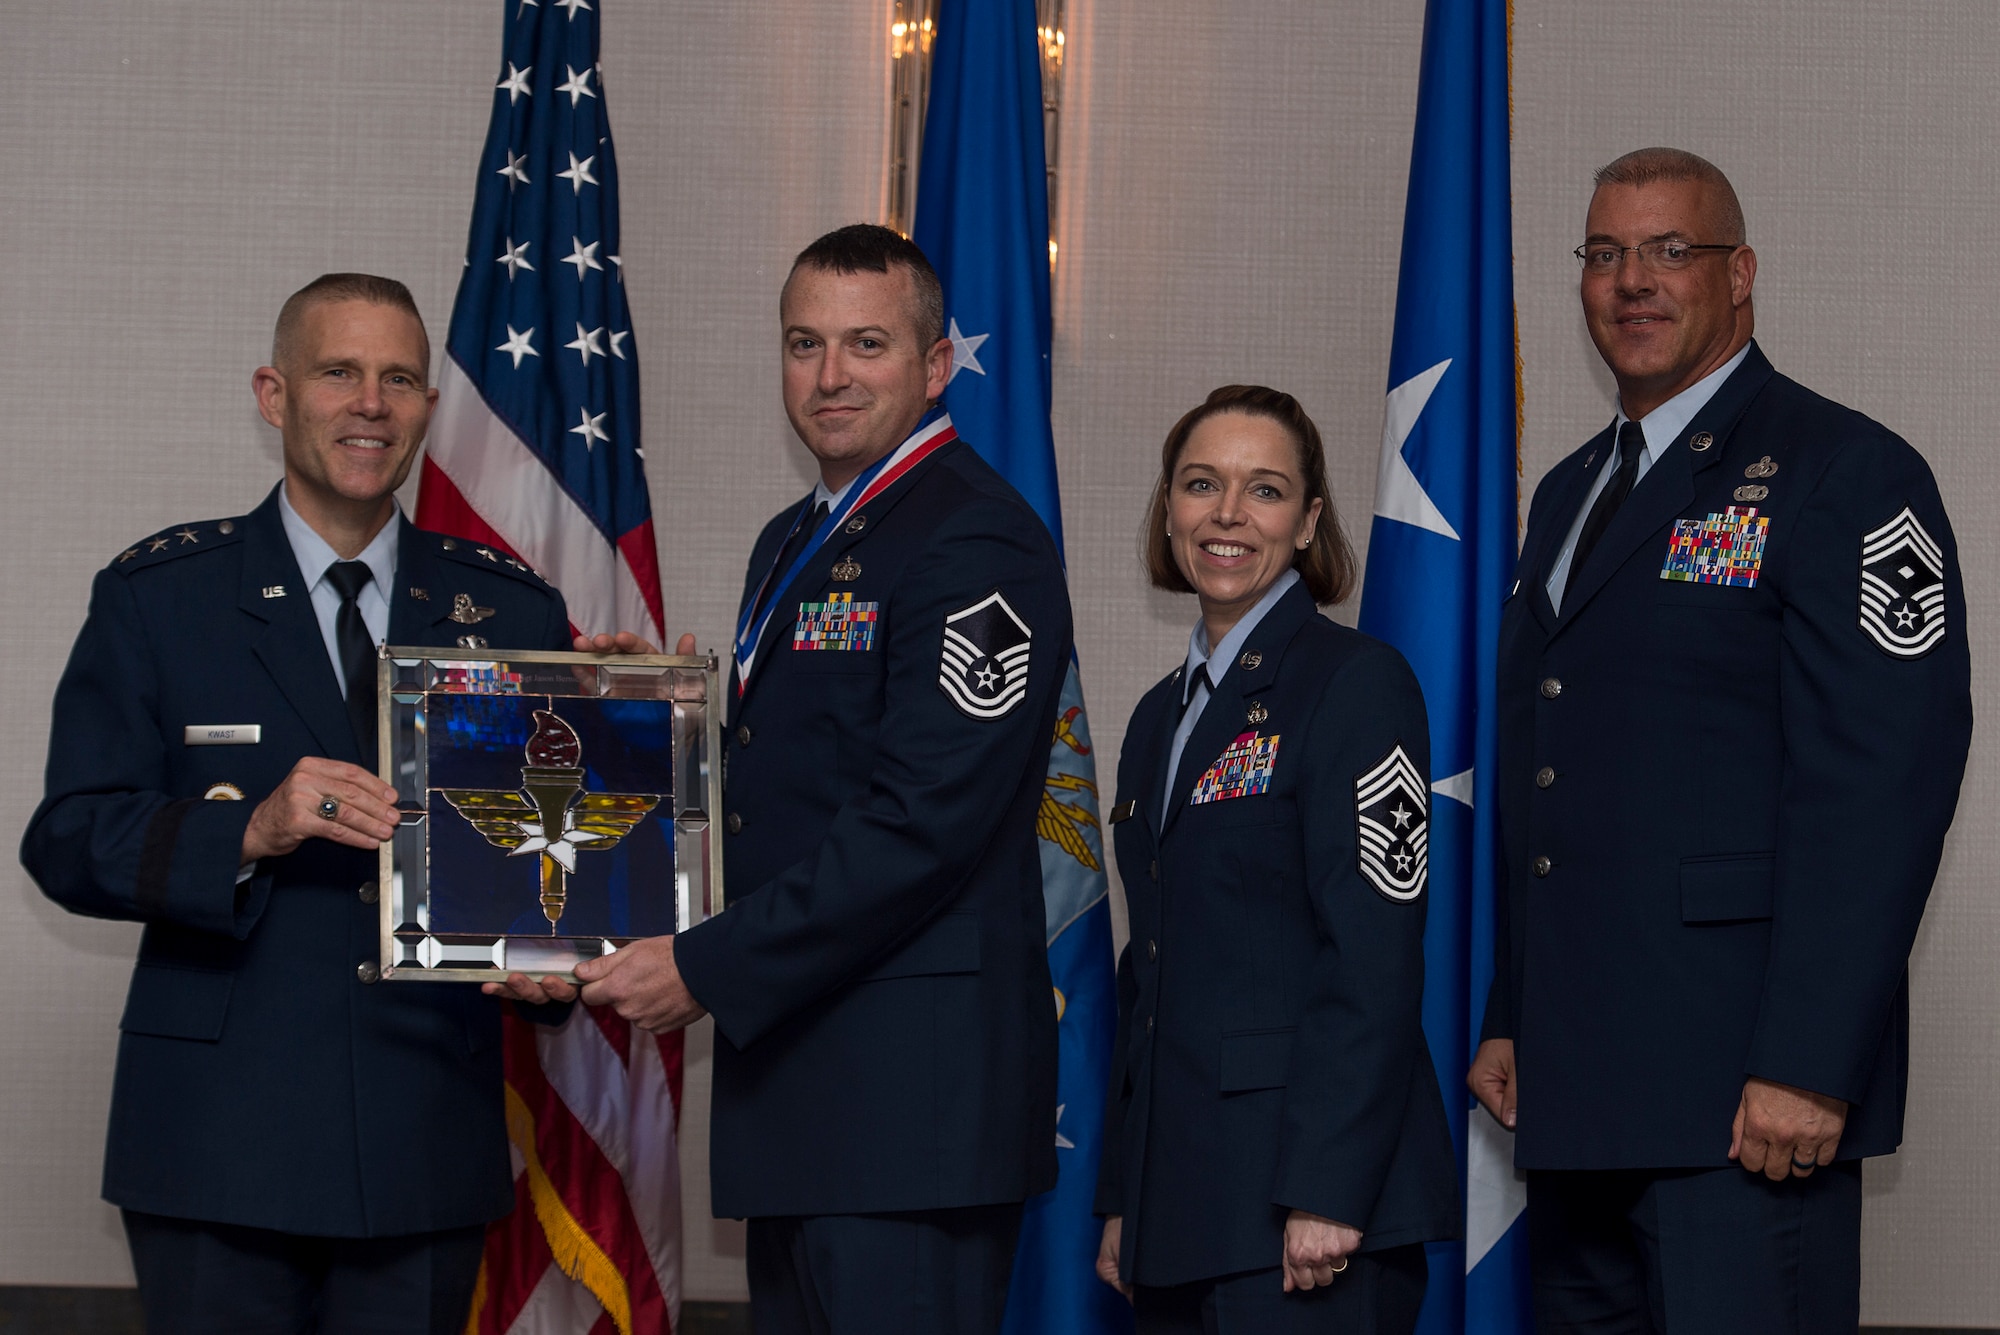 U.S. Air Force Master Sgt. Jason M. Bernich, Superintendent of the base Honor Guard at Keesler Air Force Base, Miss., receives the Chief Master Sergeant of the Air Force Base Honor Guard Program Manager of the Year Award from Lt. Gen. Steve Kwast, Commander of Air Education and Training Command, during the AETC 12 Outstanding Airmen of the Year Awards banquet Feb. 22, 2018 in Orlando, Fla. Bernich shaped AETC’s largest Honor Guard area of responsibility, managing 740 honors, 9,500 man-hours and a $70,000 budget, codified funeral requests and liaised with 674 directors and 422 funeral homes, reducing processing time by 101 hours annually, as well as restructured a uniform exchange, outfitting 45 Civil Air Patrol and 122 Junior Reserve Officers' Training Corps cadets. (U.S. Air Force photo by Staff Sgt. Kenneth W. Norman)